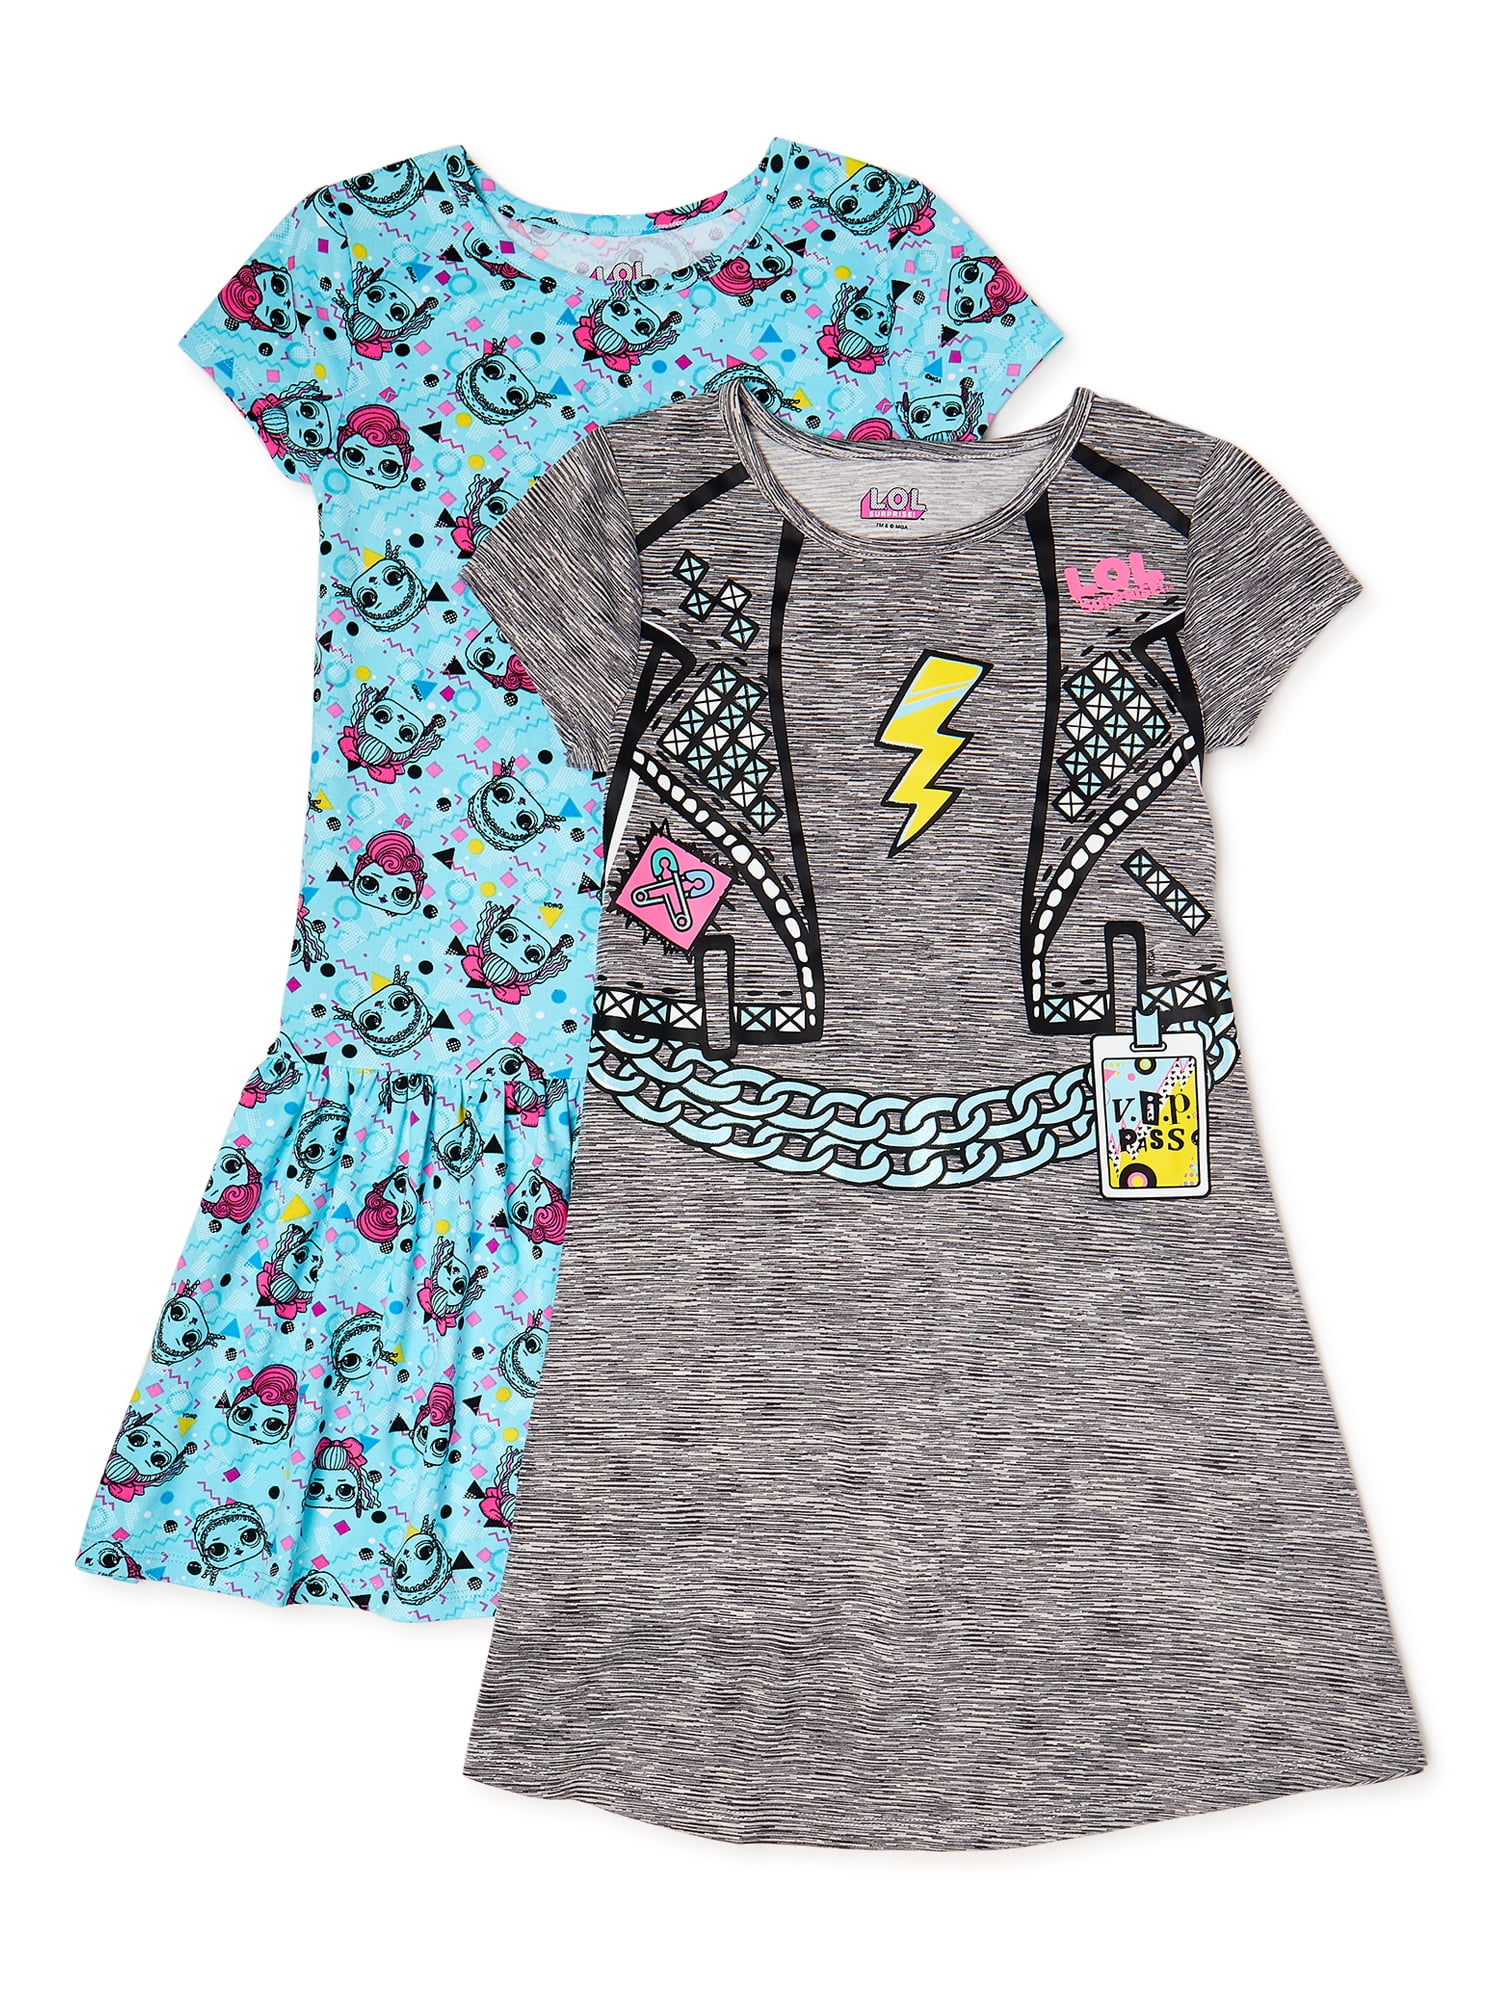 L.O.L. Surprise! Girls Short Sleeve Play Dress, 2-Pack, Sizes 4-12